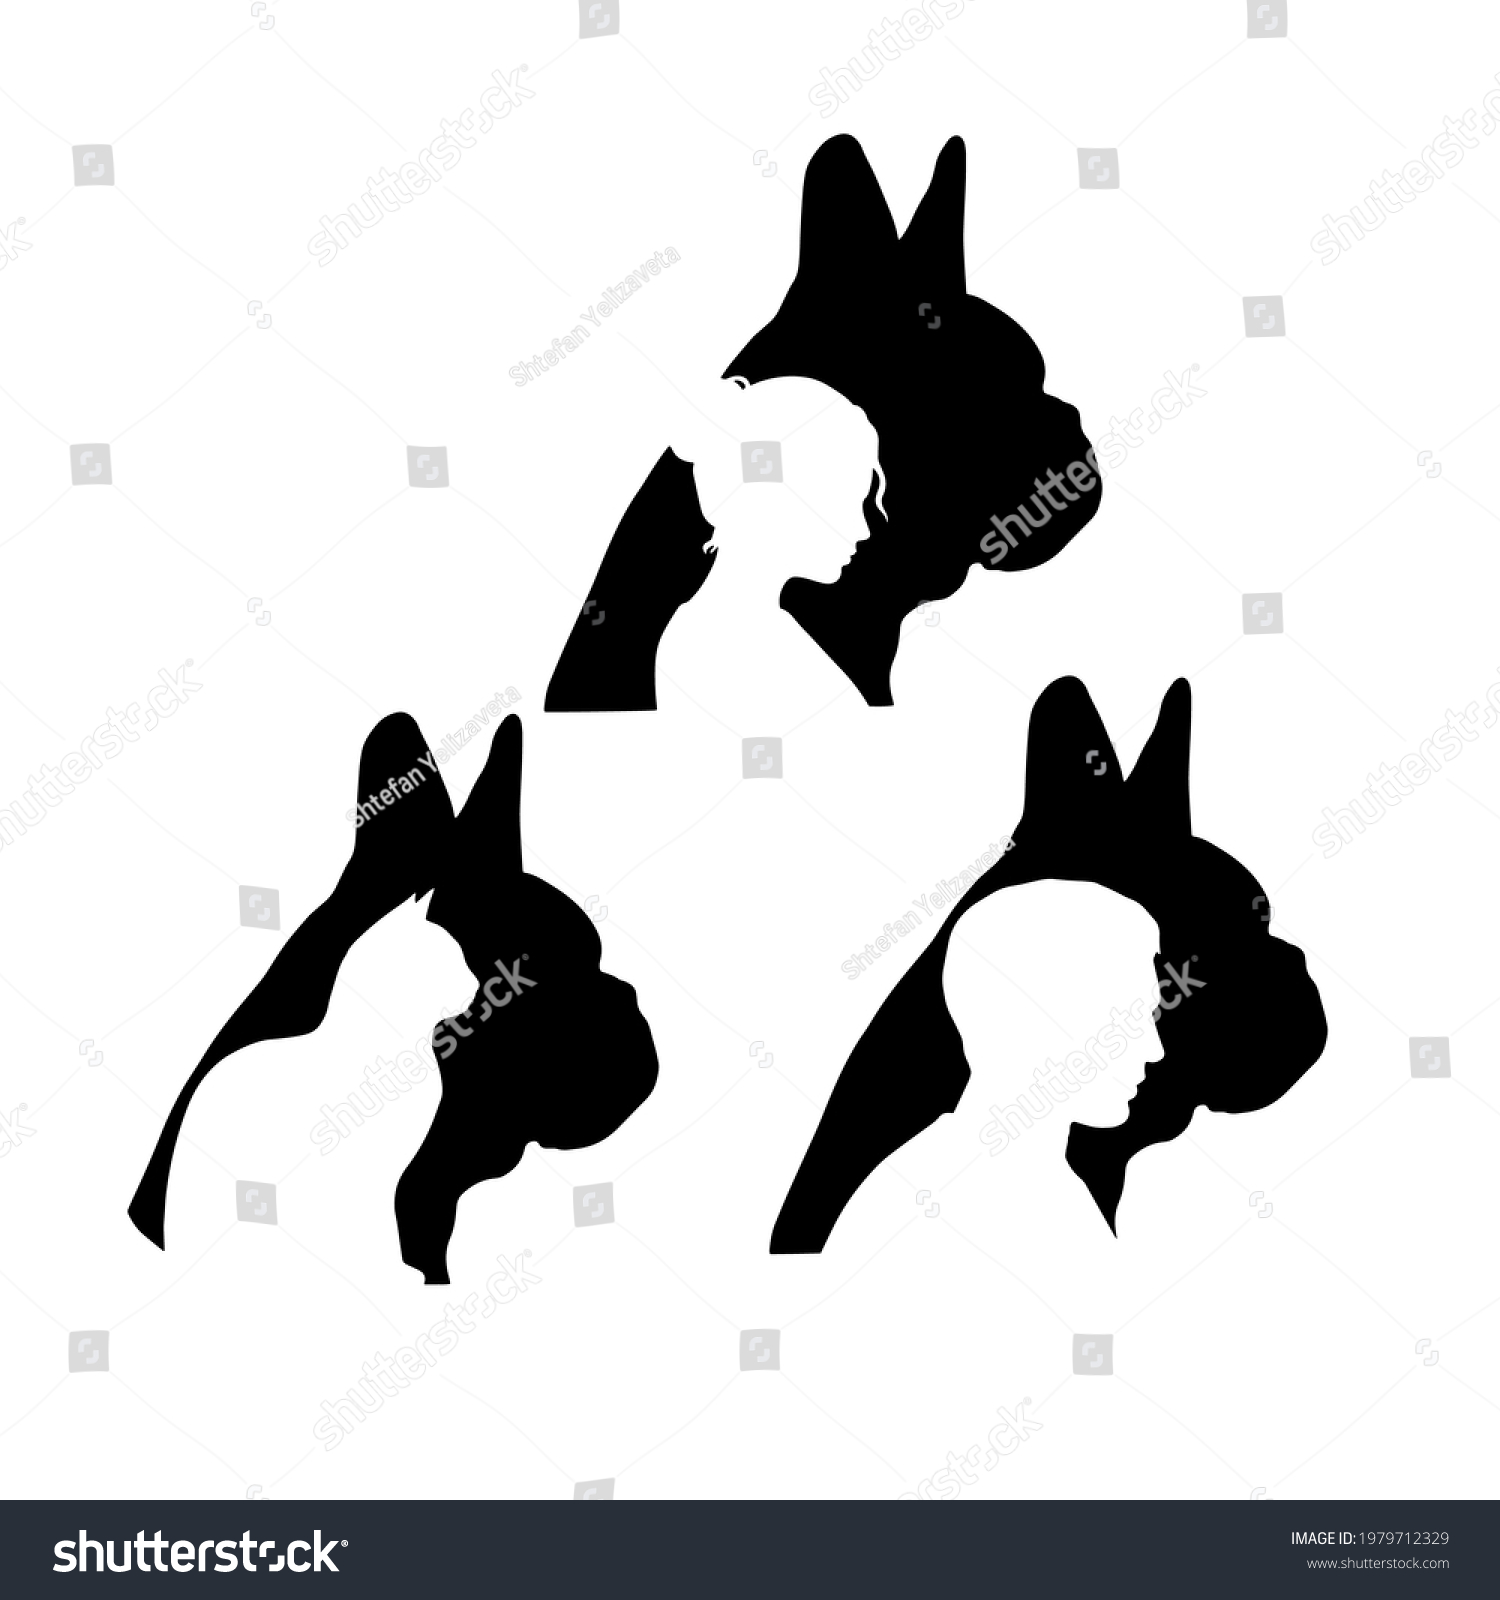 SVG of French bulldog profile with silhouette of woman man and cat in graphic style. Creative illustrations
Clipart file for cutting vinyl decal and printing  svg